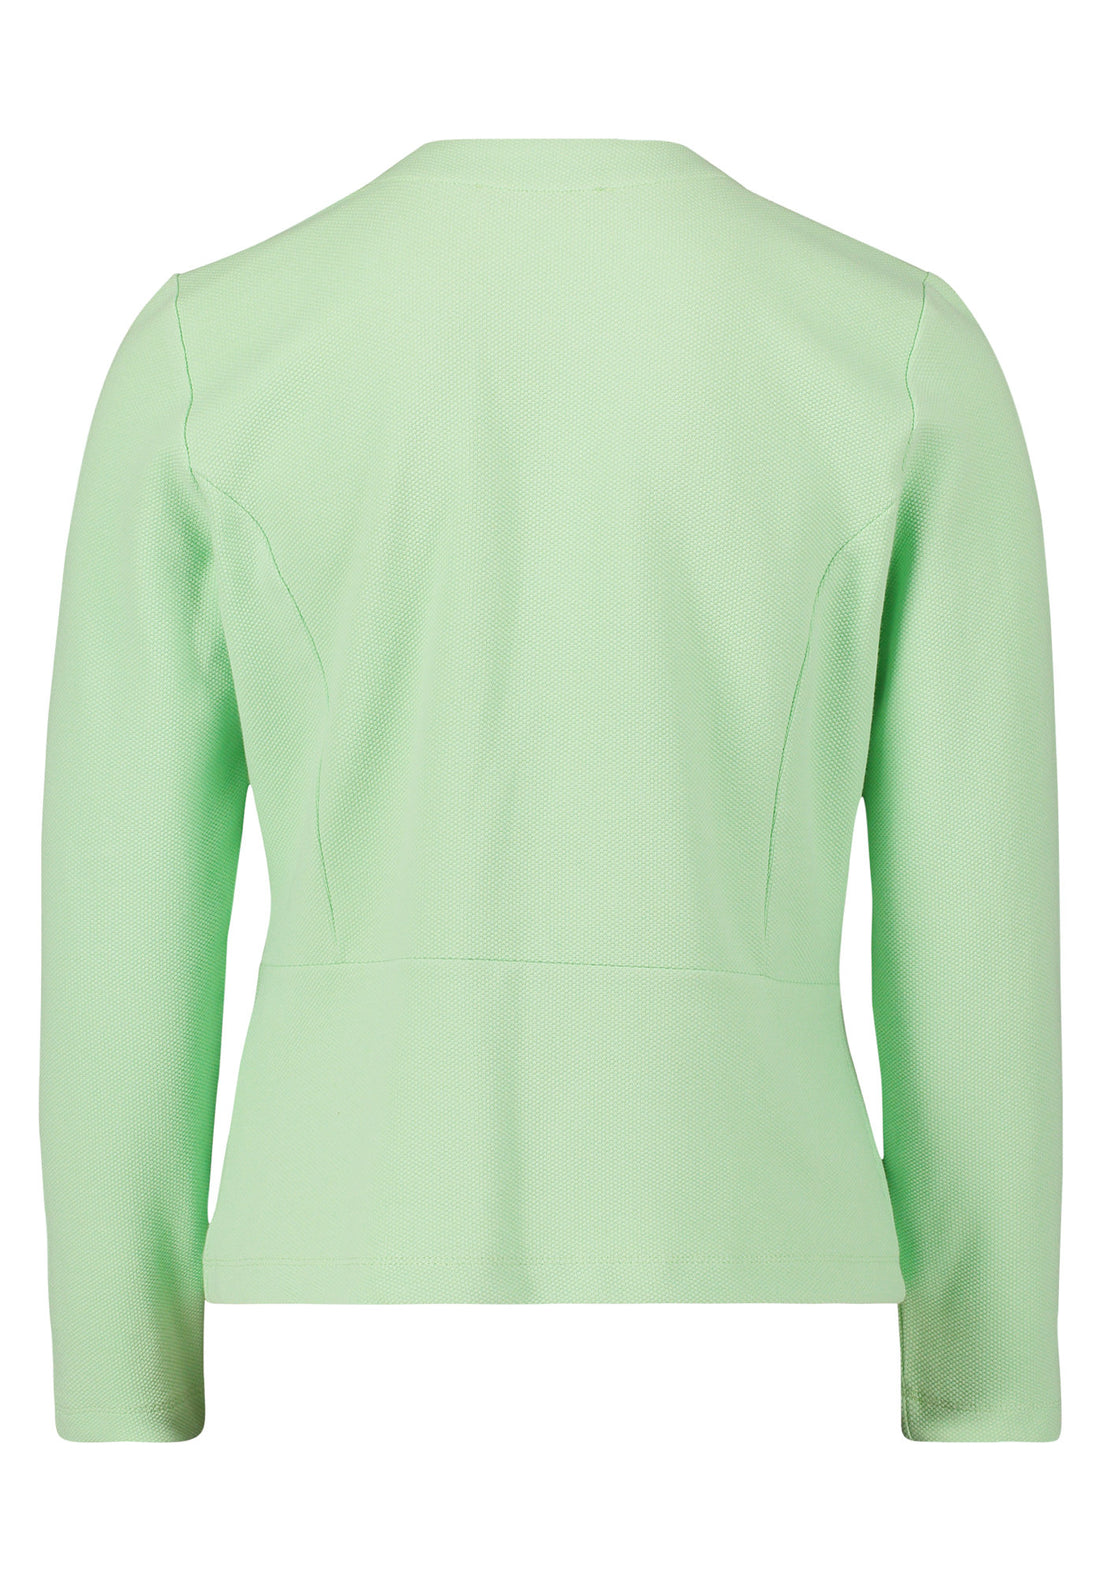 Pastel Green Fitted Blazer Style Cardigan_4340 1050_5242_02